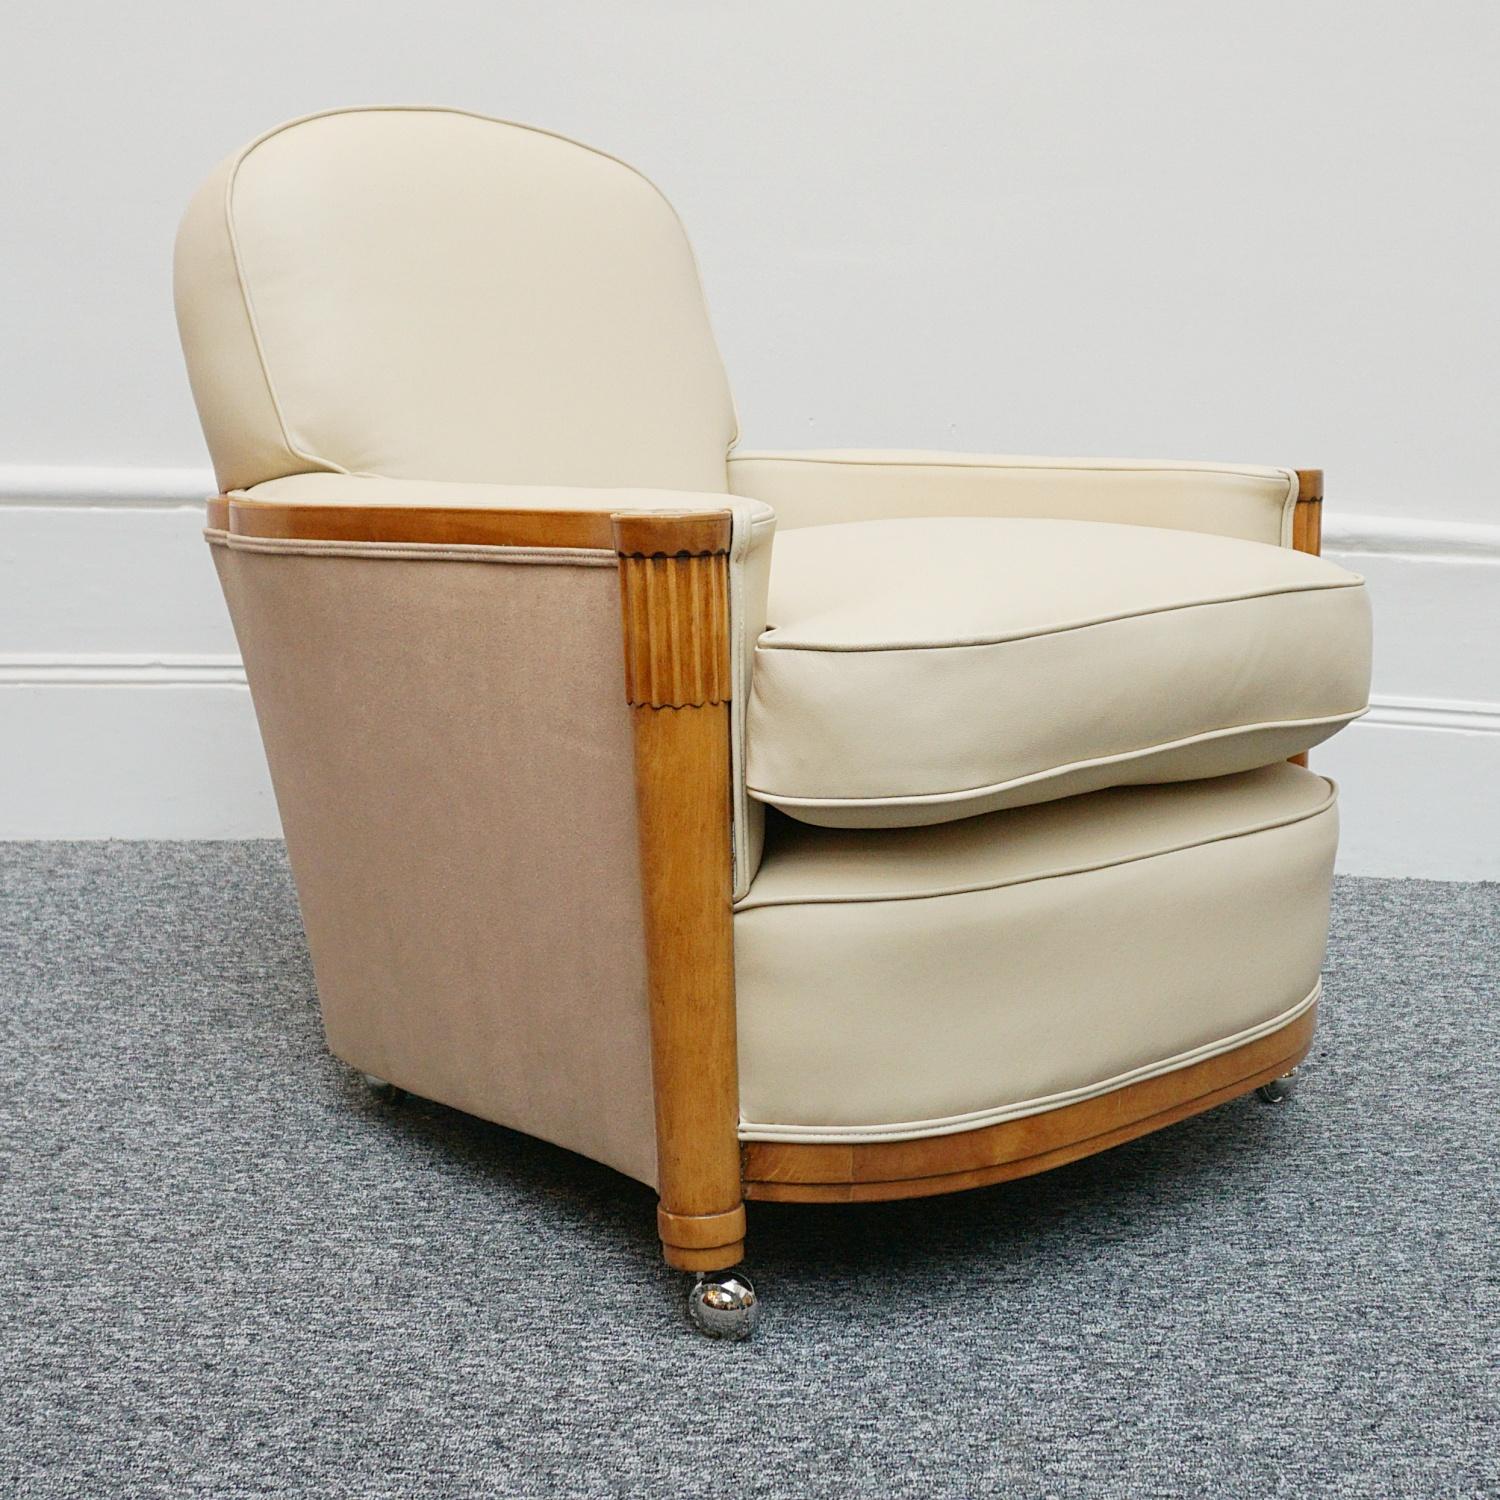 English Pair of Art Deco Lounge Chairs by Maurice Adams Cream Leather and Satinwood 